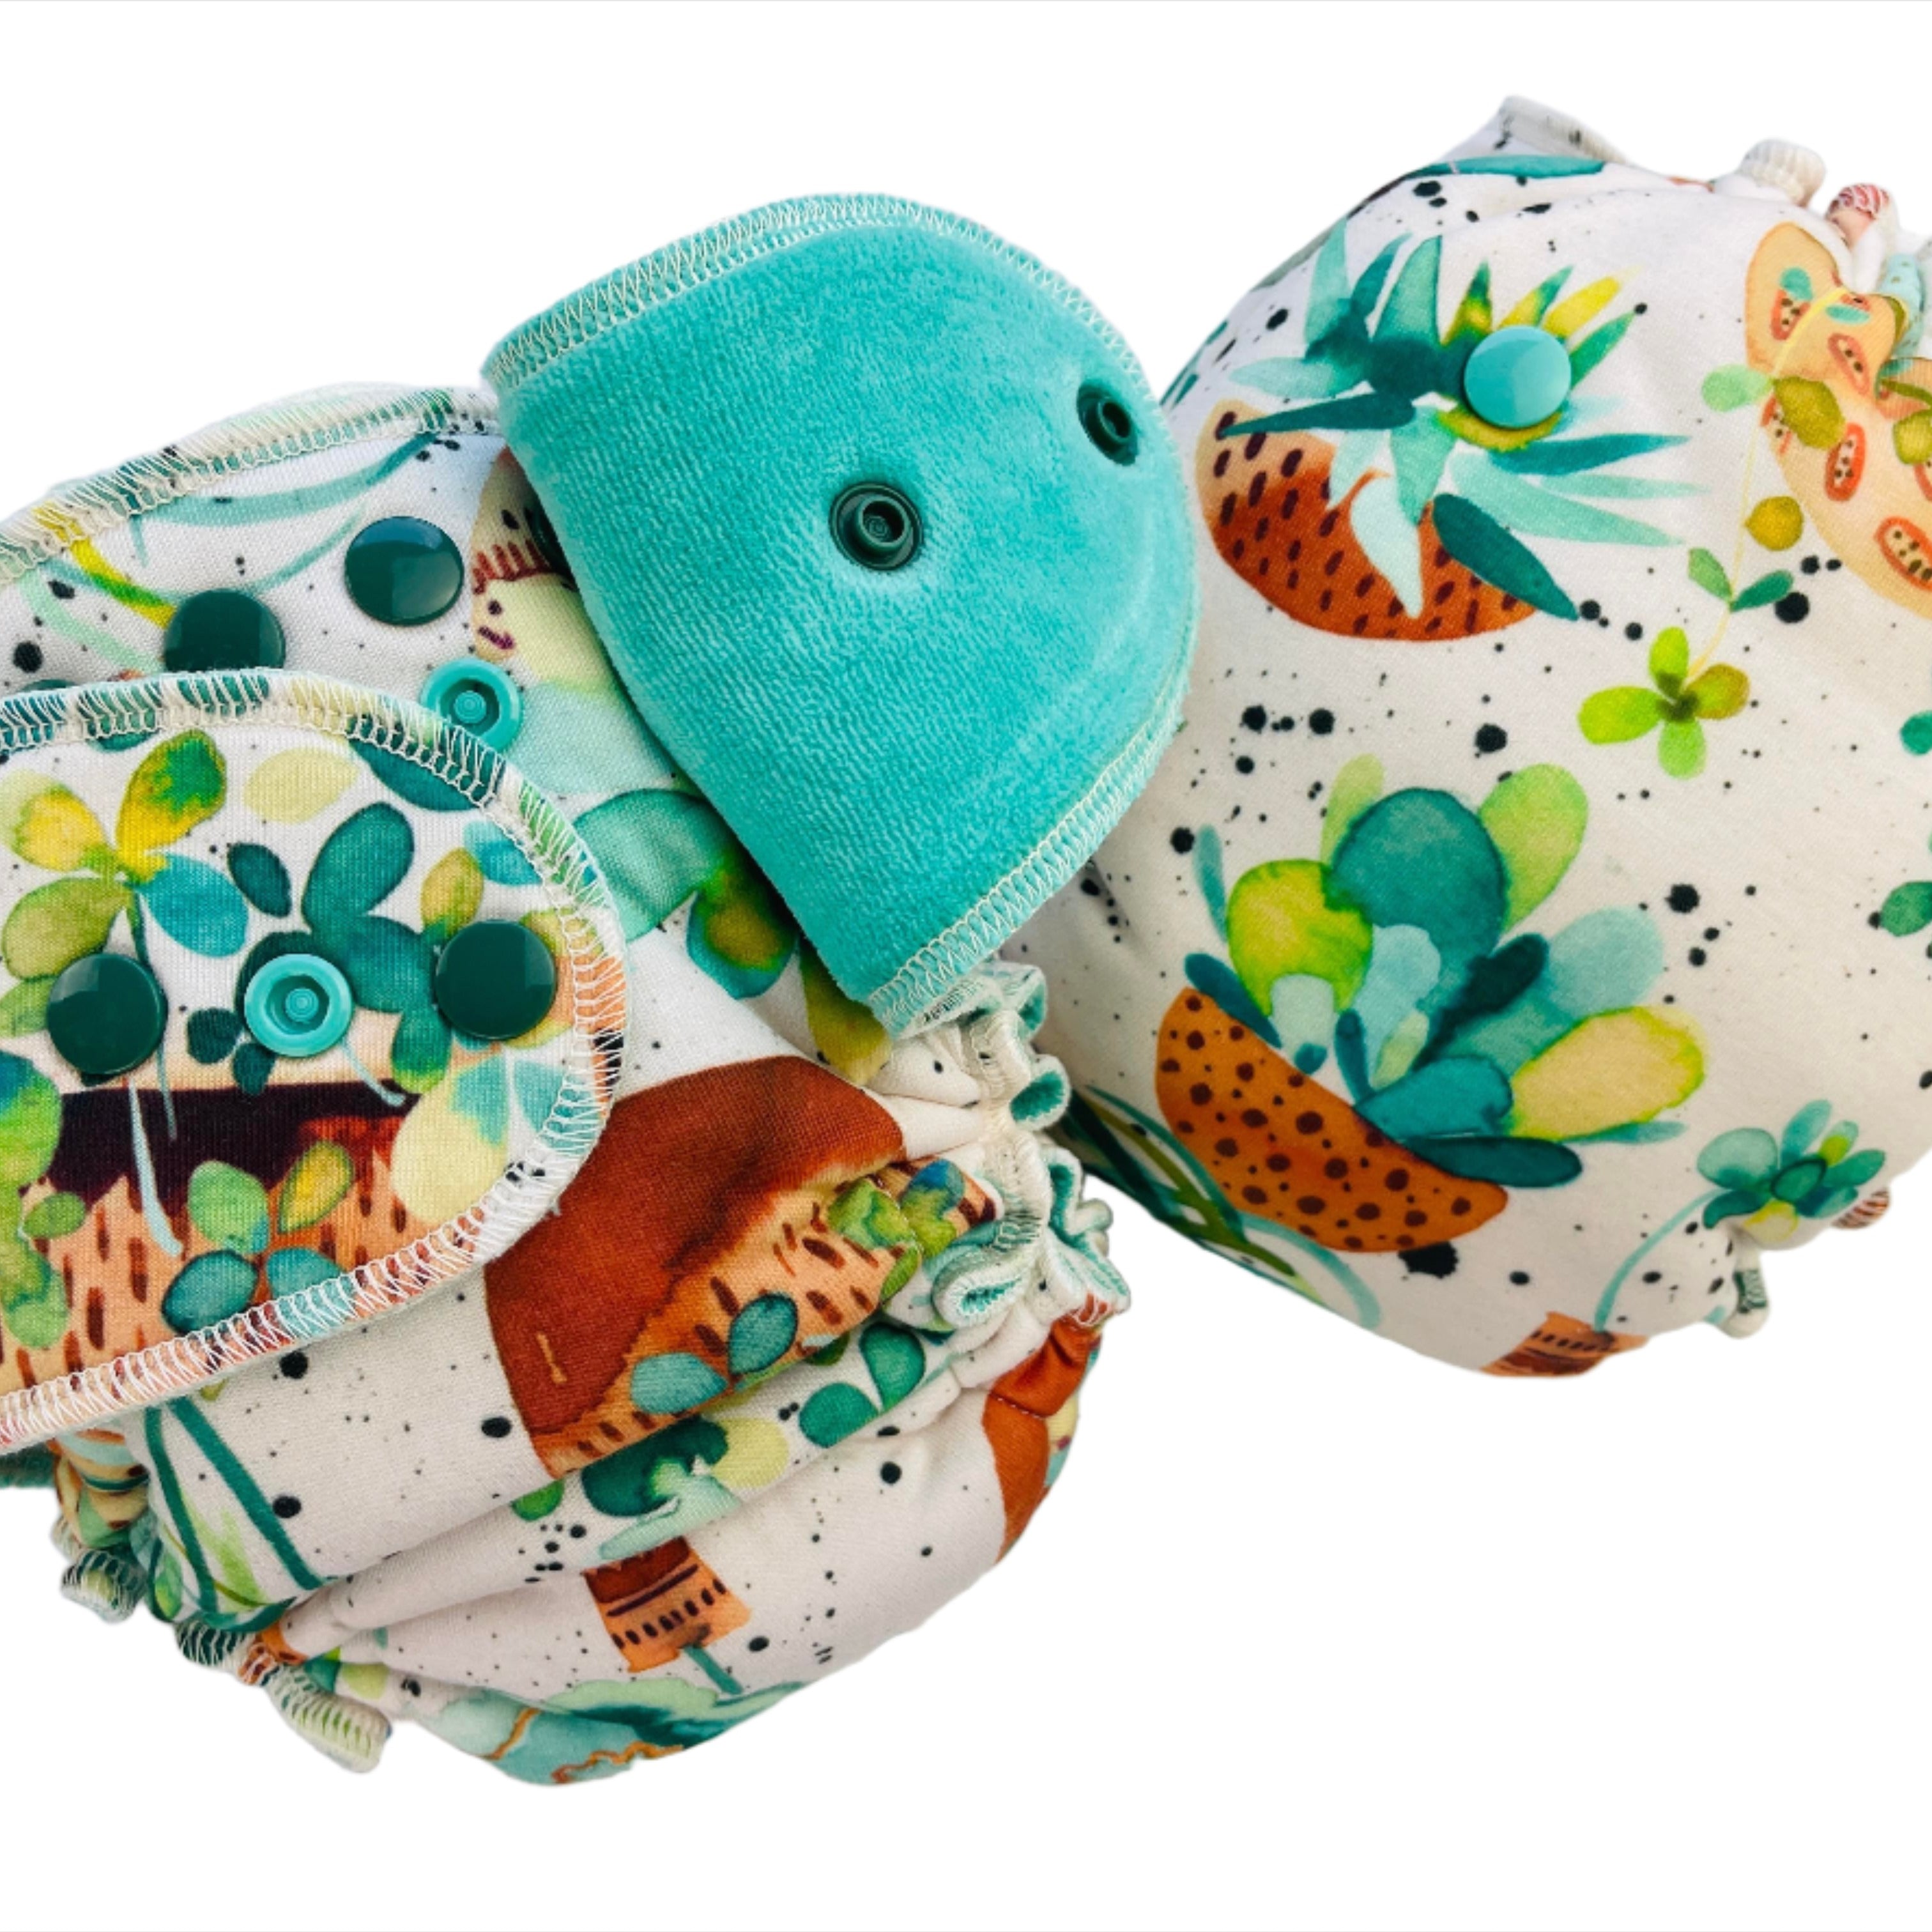 Lilly & Frank cloth diaper Indoor Garden Toddler Cloth Diaper - Fitted - Serged